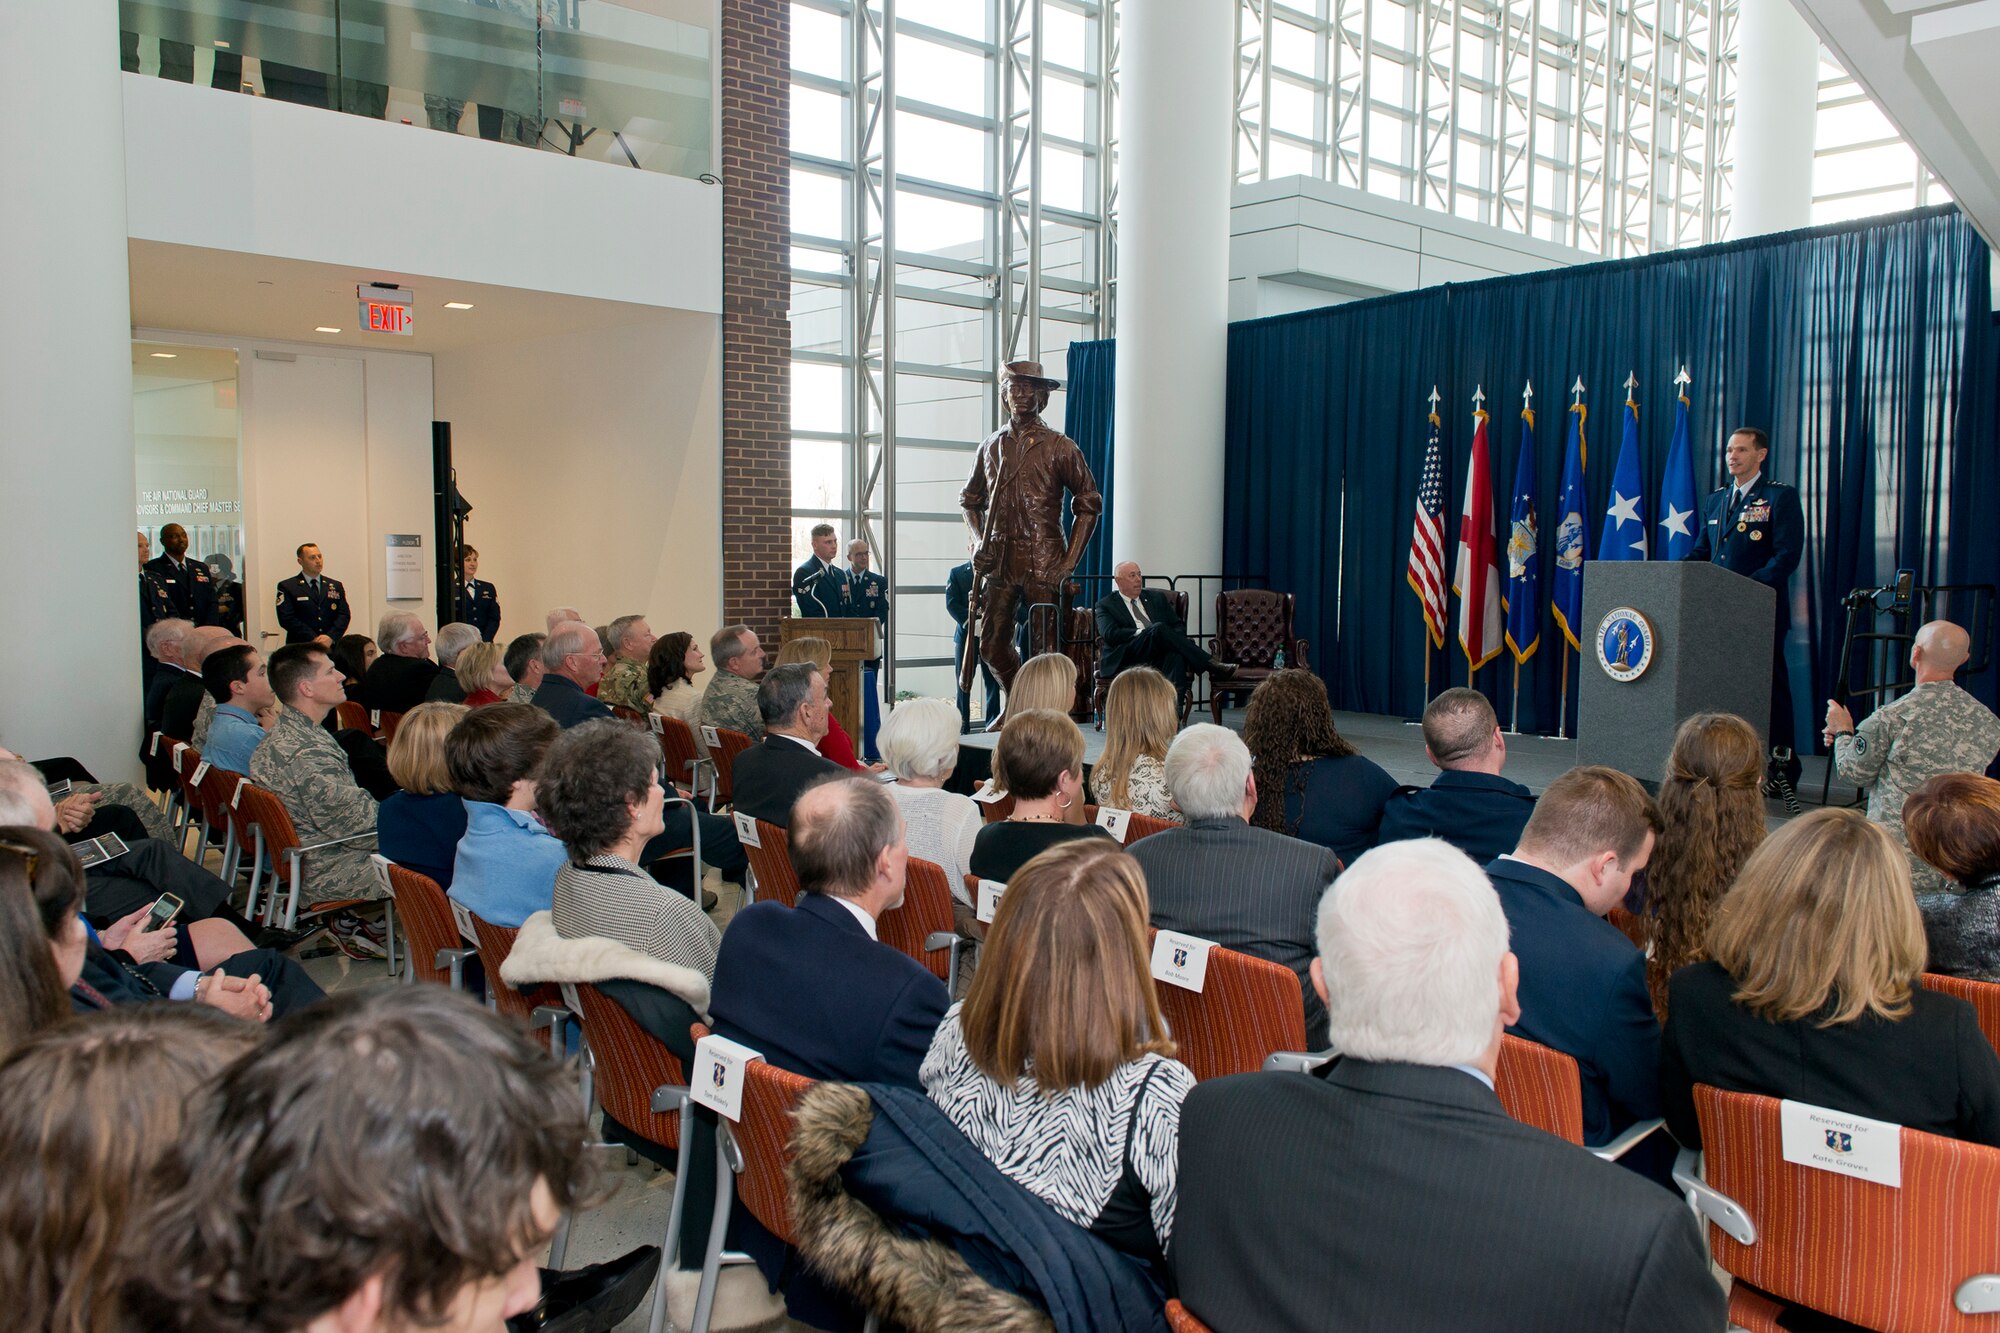 Lt. Gen. Stanley E. Clarke III, director of the Air National Guard, speaks to attendees during his retirement ceremony at the ANG Readiness Center, Joint Base Andrews, Md., December 18. 2015. Clarke is the 15th director of the Air National Guard. (Air National Guard photo by Master Sgt. Marvin R. Preston/Released)